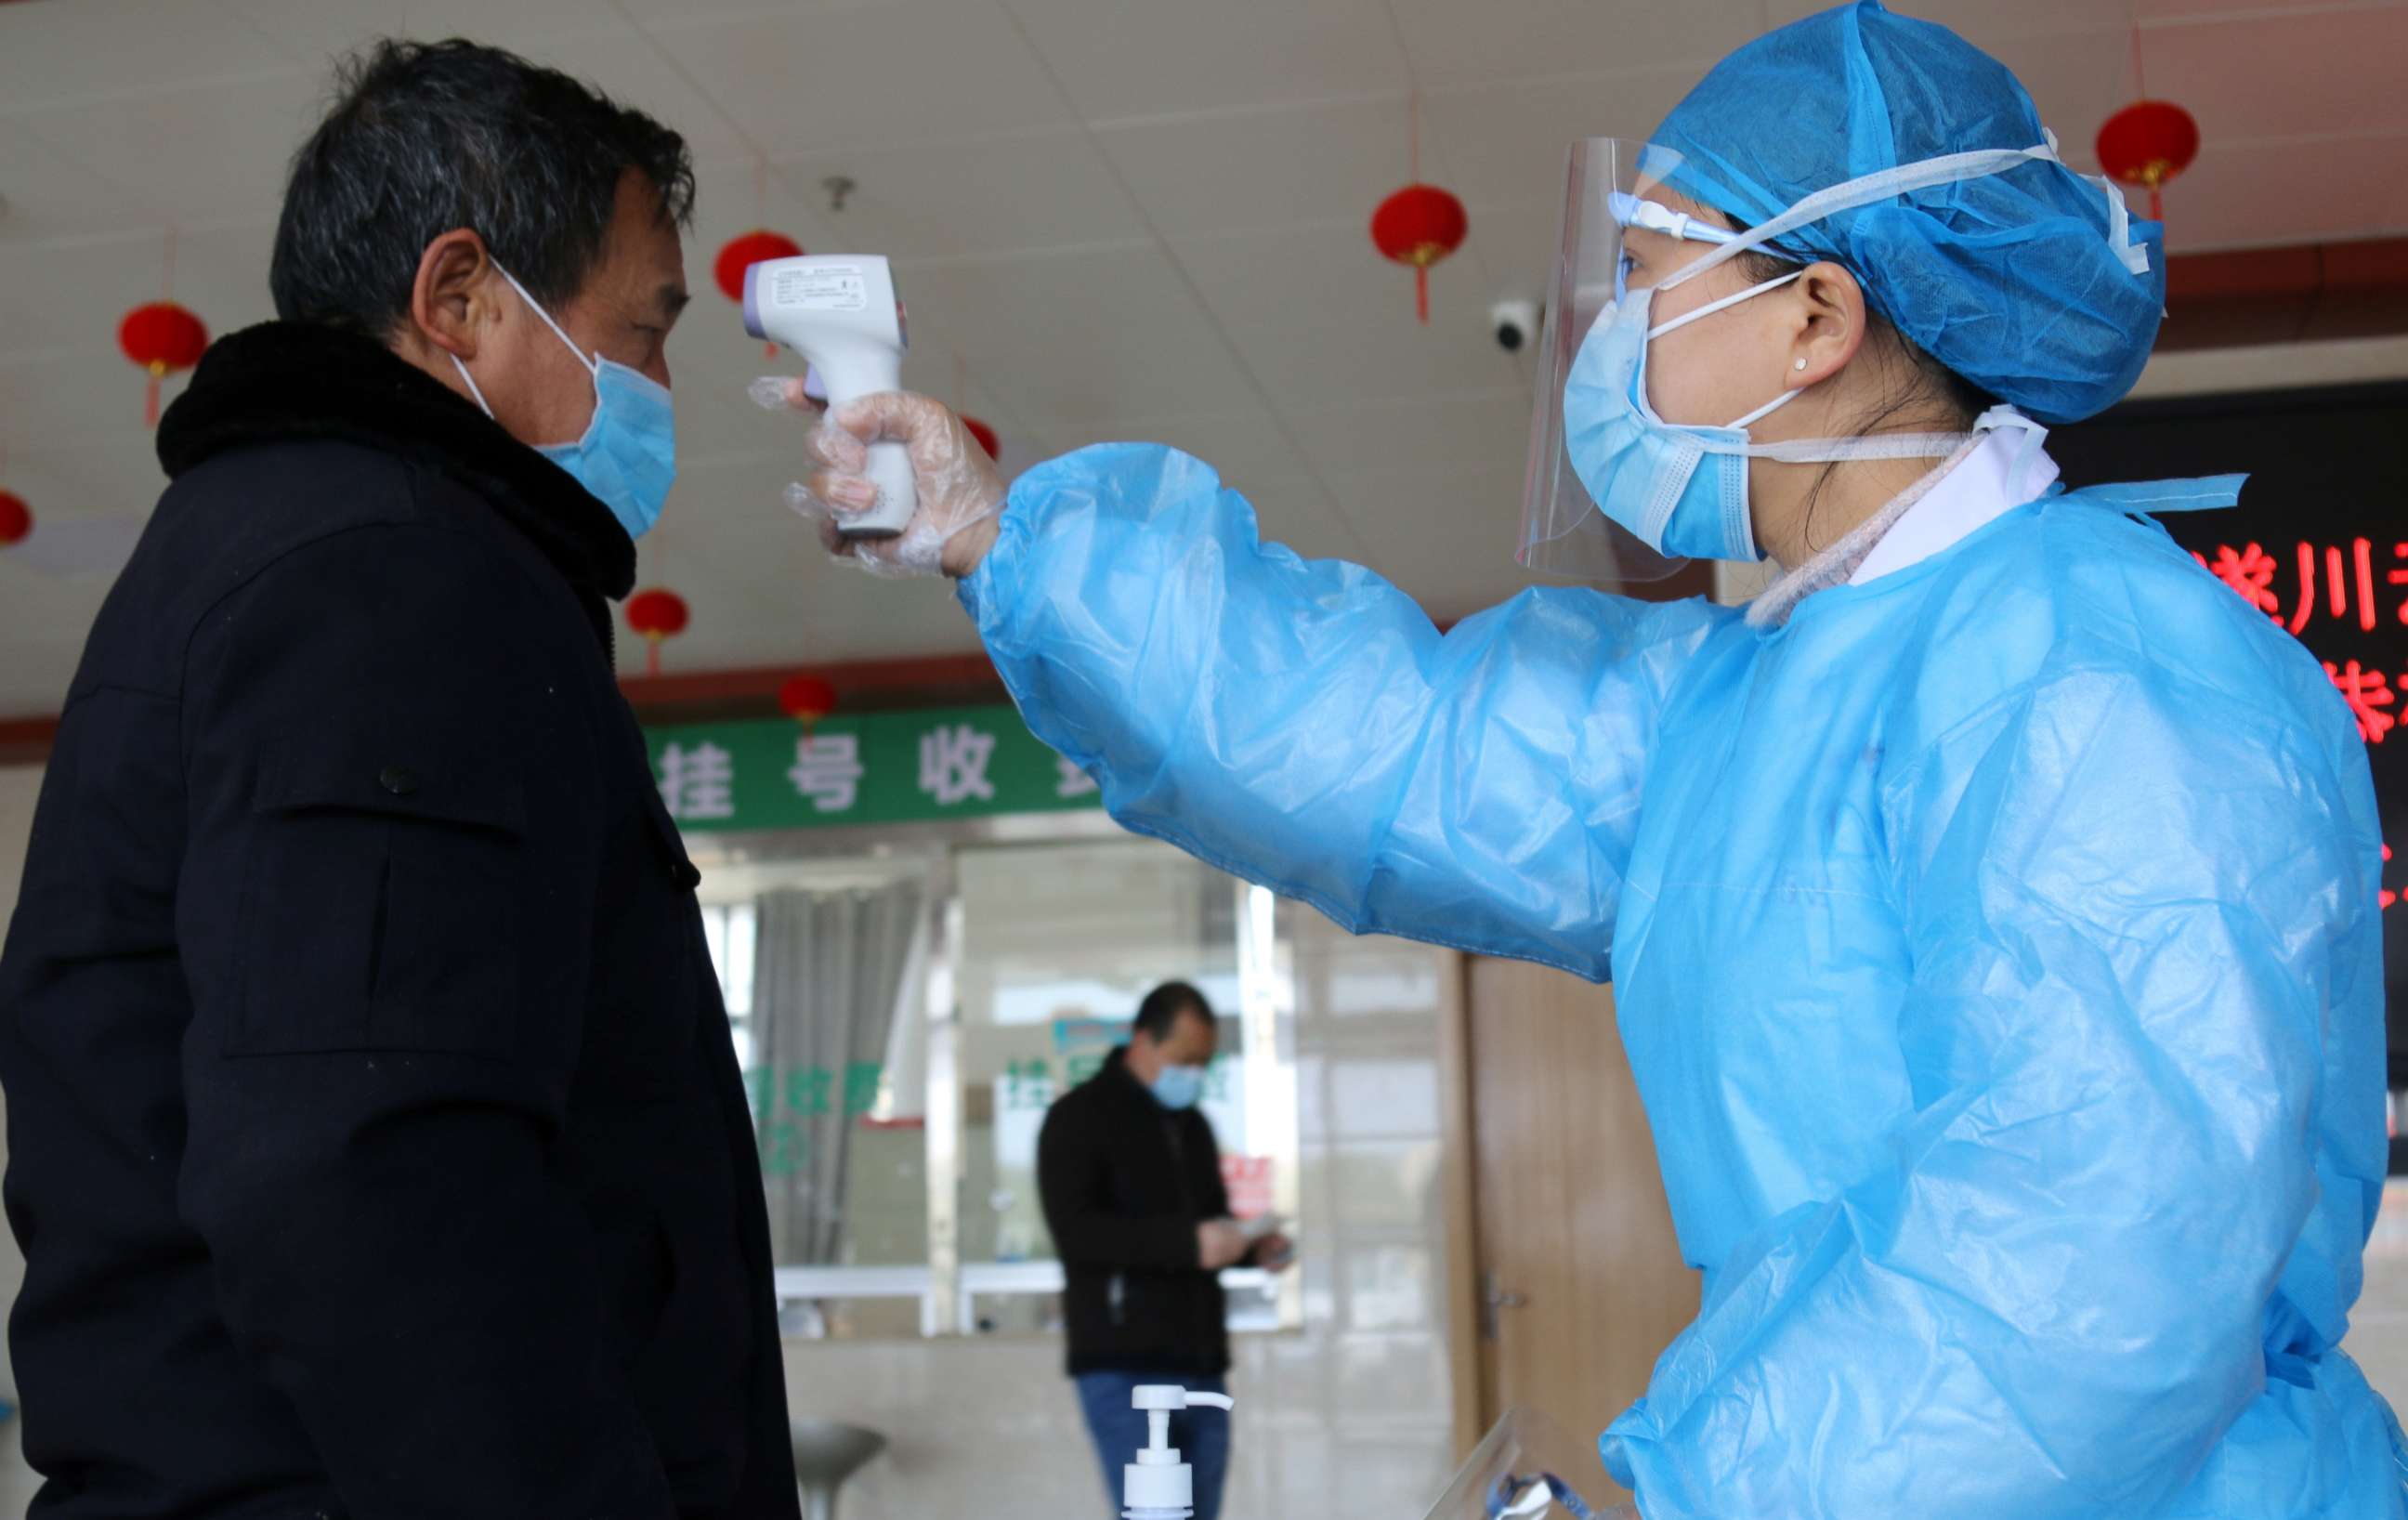 PHOTO: A medical worker takes a man's body temperature at an entrance to a hospital in Suichuan, Jiangxi province, China, on Feb. 2, 2020, as the country is hit by an outbreak of the new coronavirus.